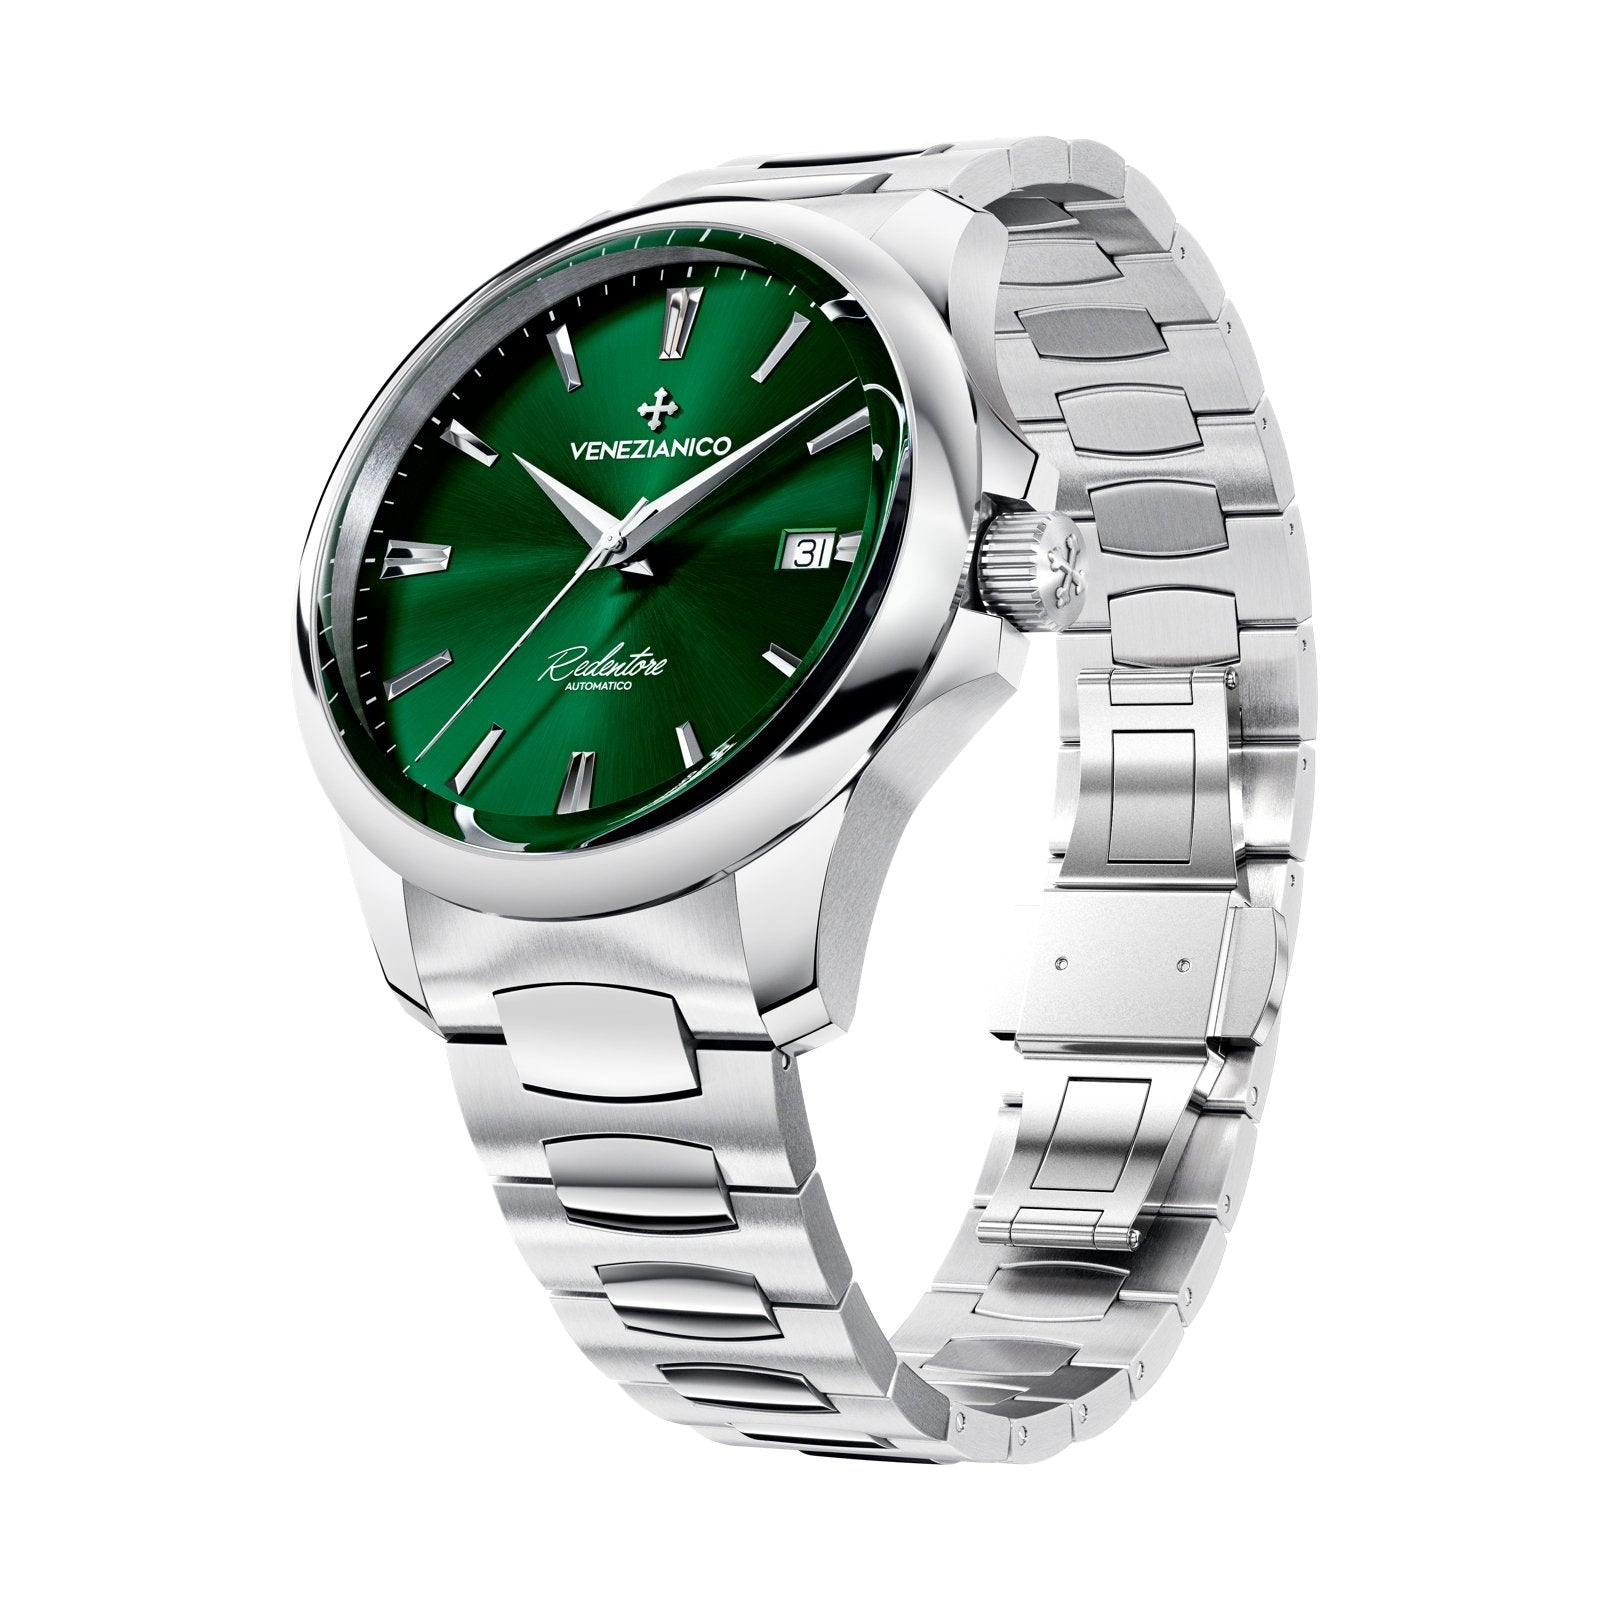 Venezianico Automatic Watch Redentore 40 Green Steel 1221501C - Watches & Crystals